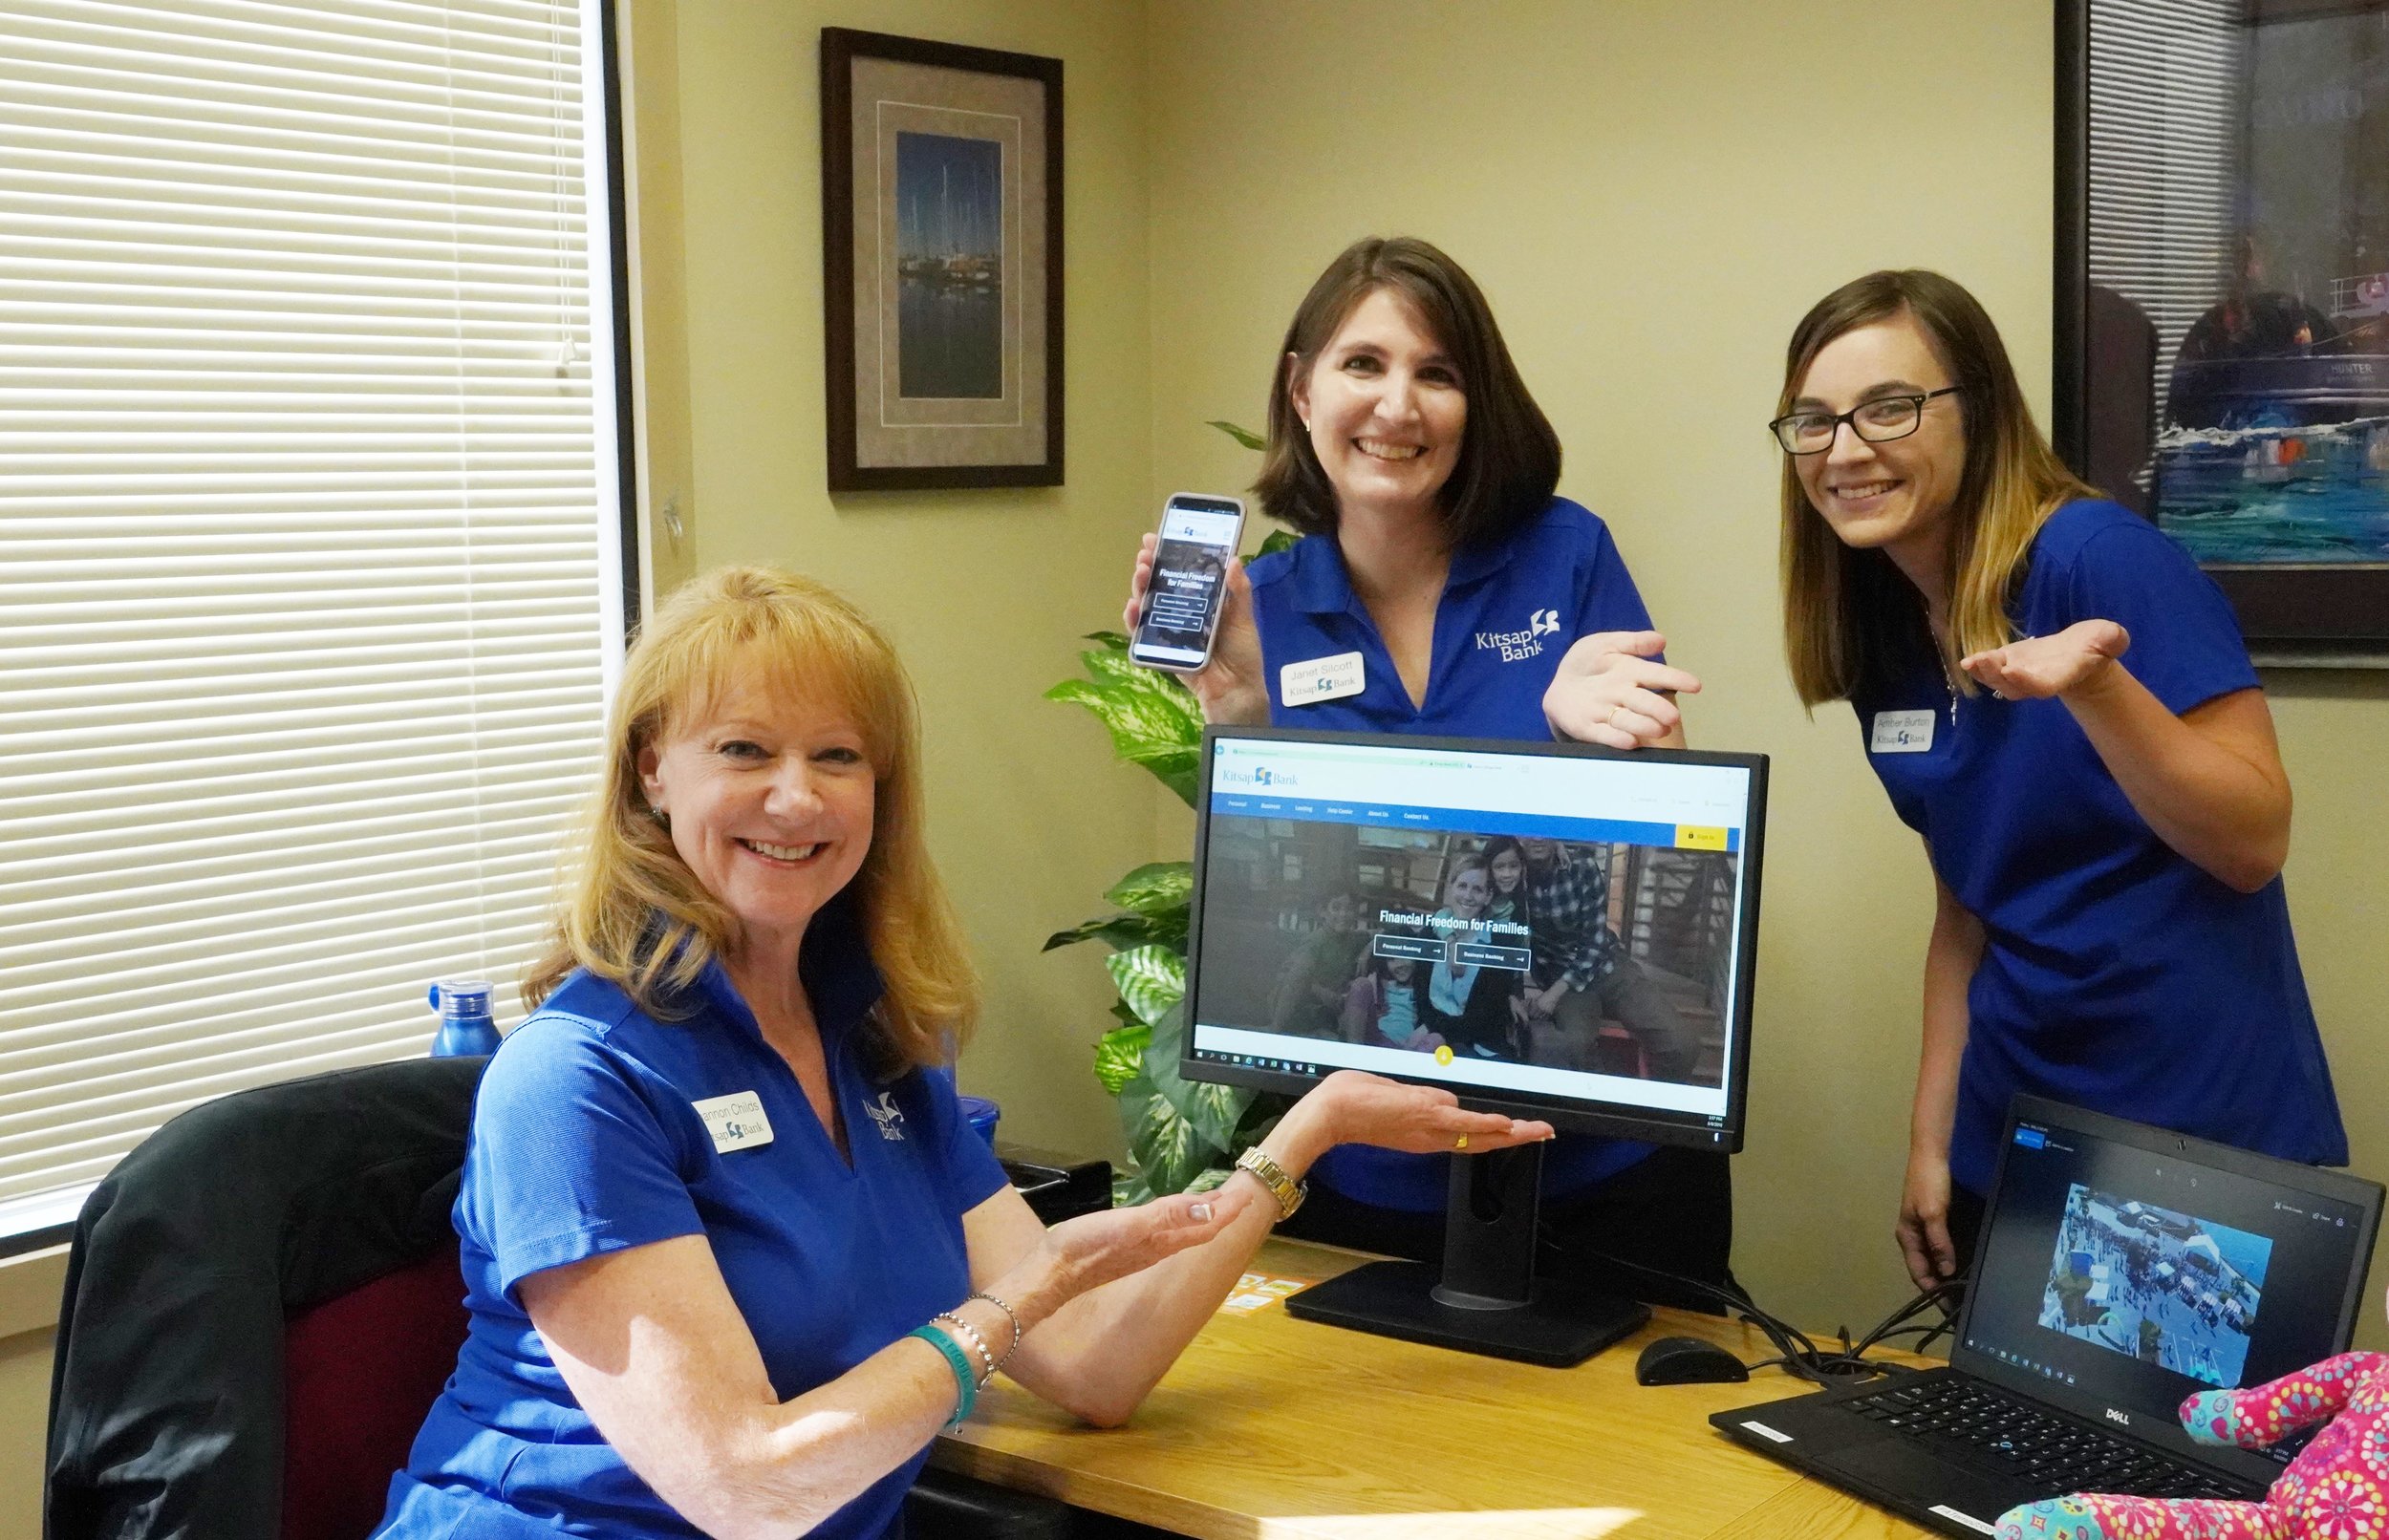 Janet and her mighty team of three in the Kitsap Bank marketing department recently rolled out a company-wide rebrand, in celebration of the bank’s 110 year anniversary.